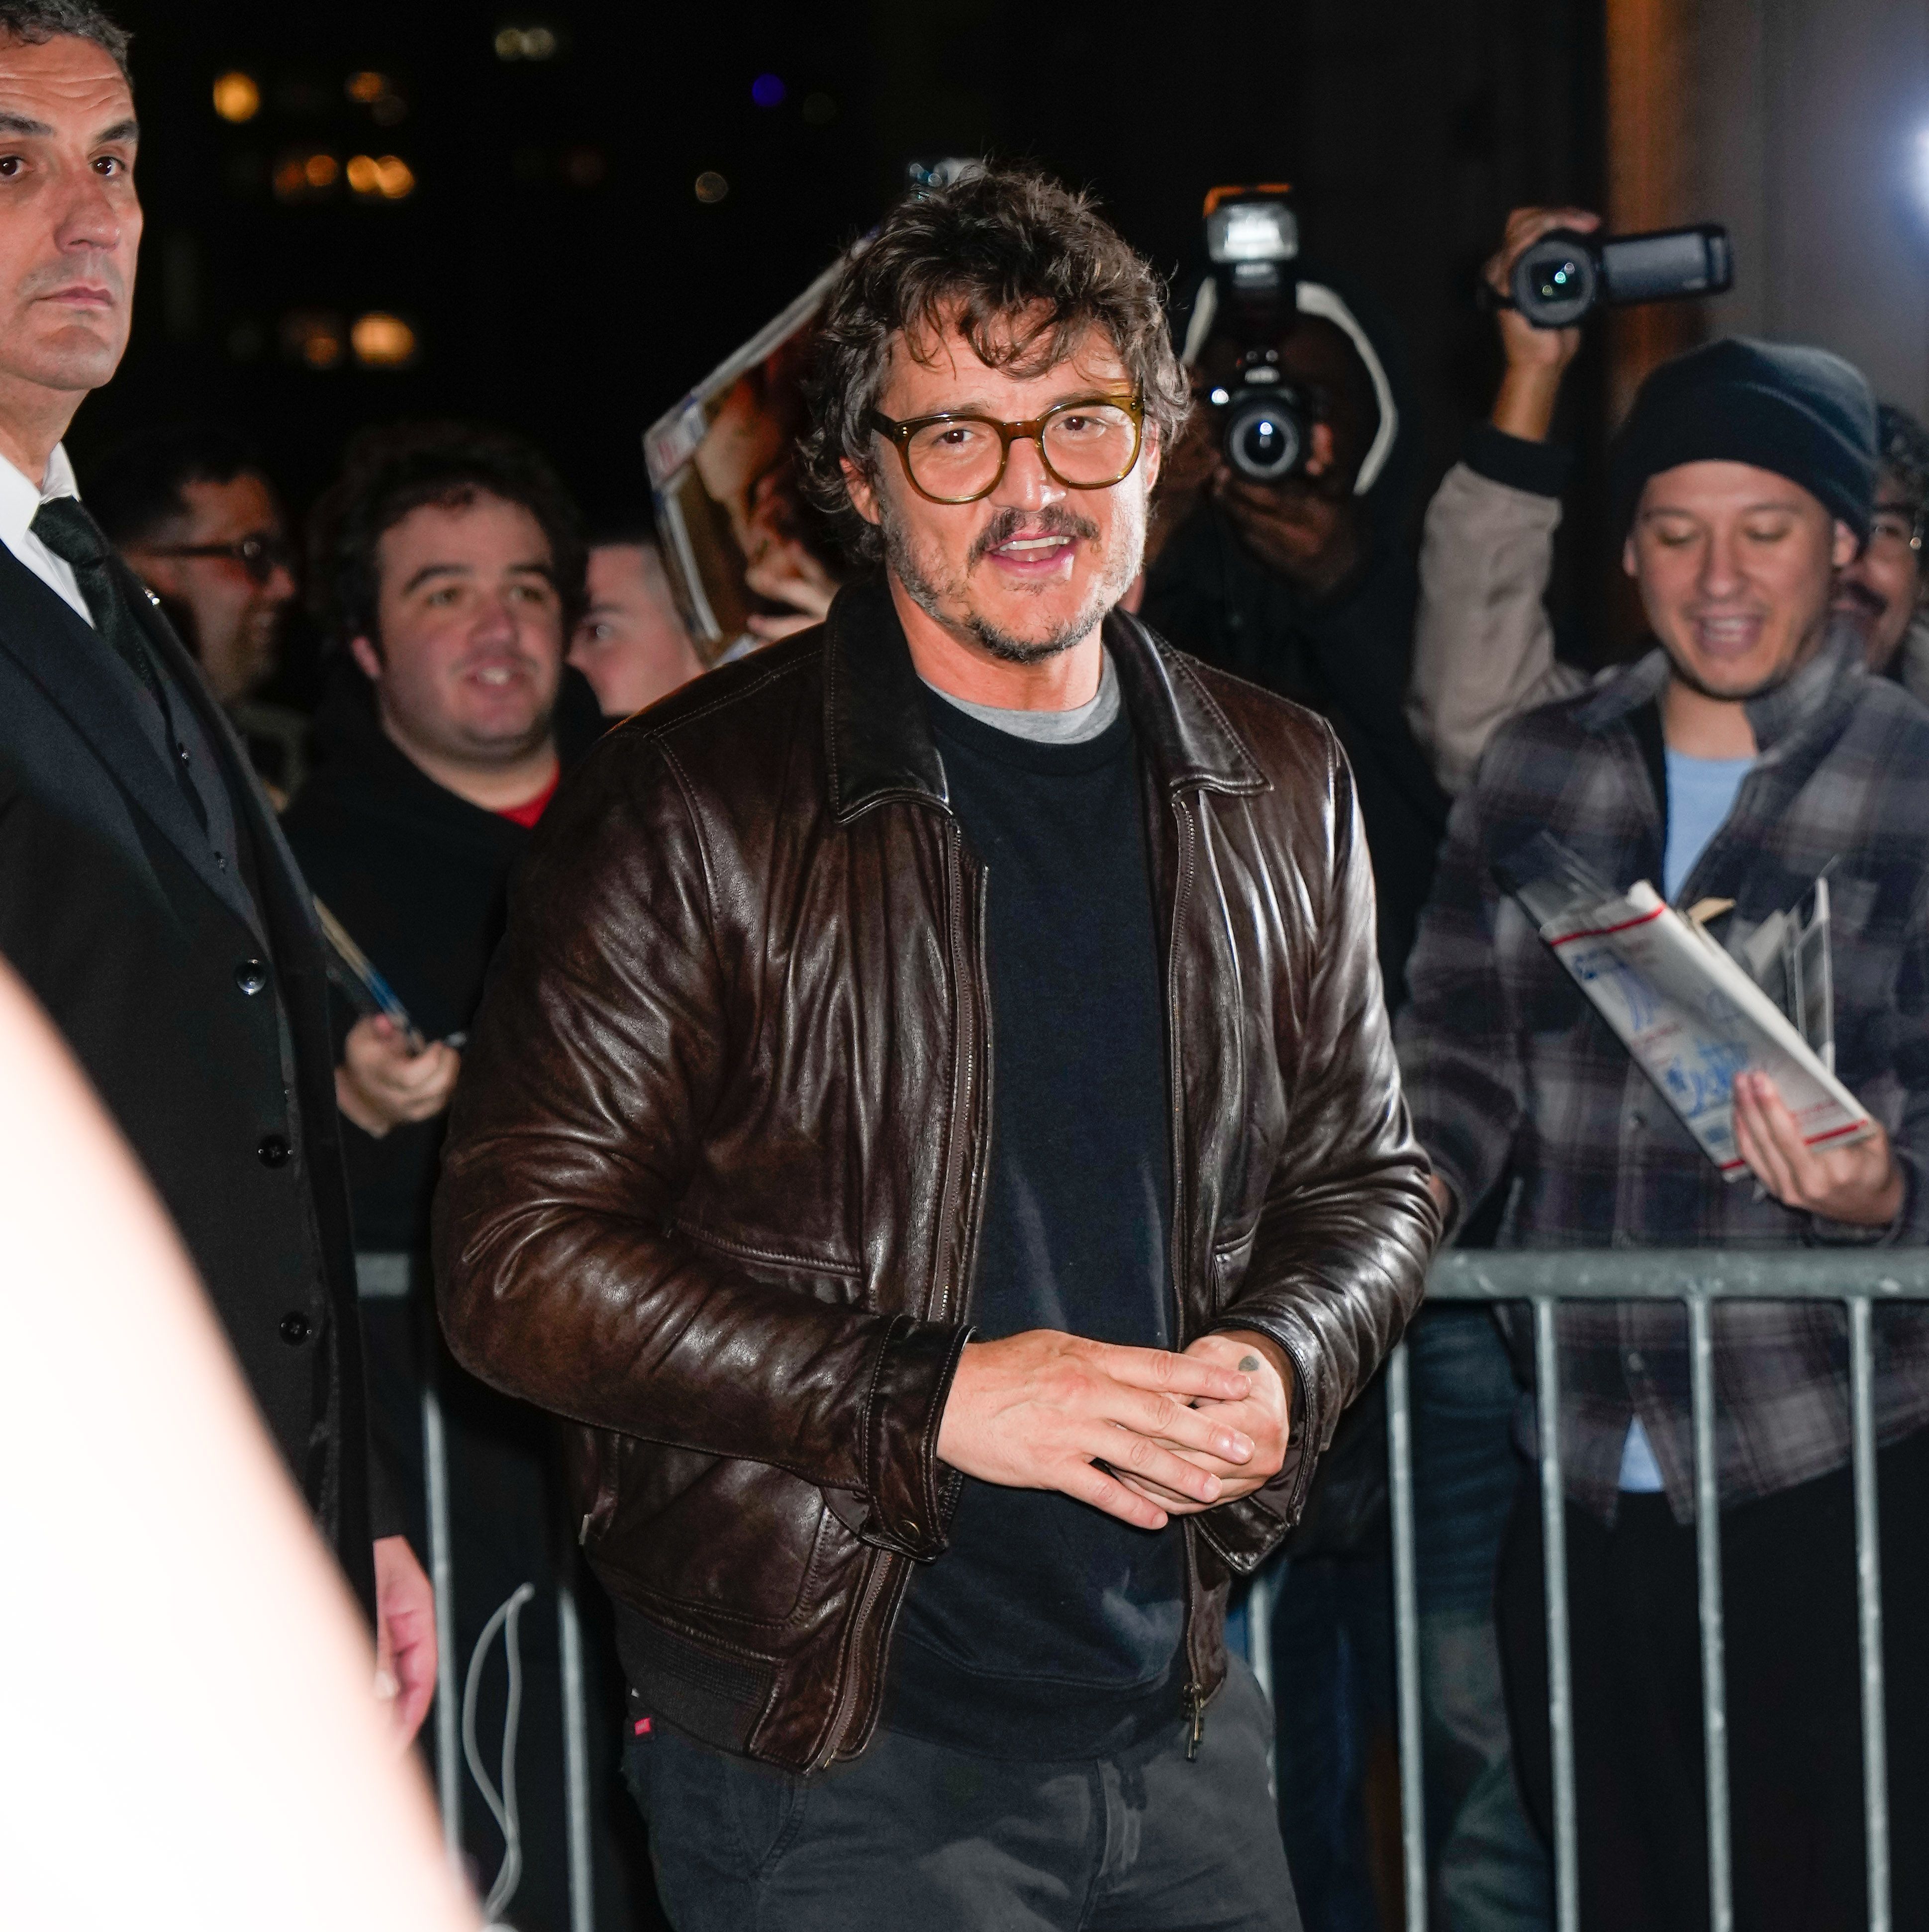 Live from New York, It's Pedro Pascal's New Balances